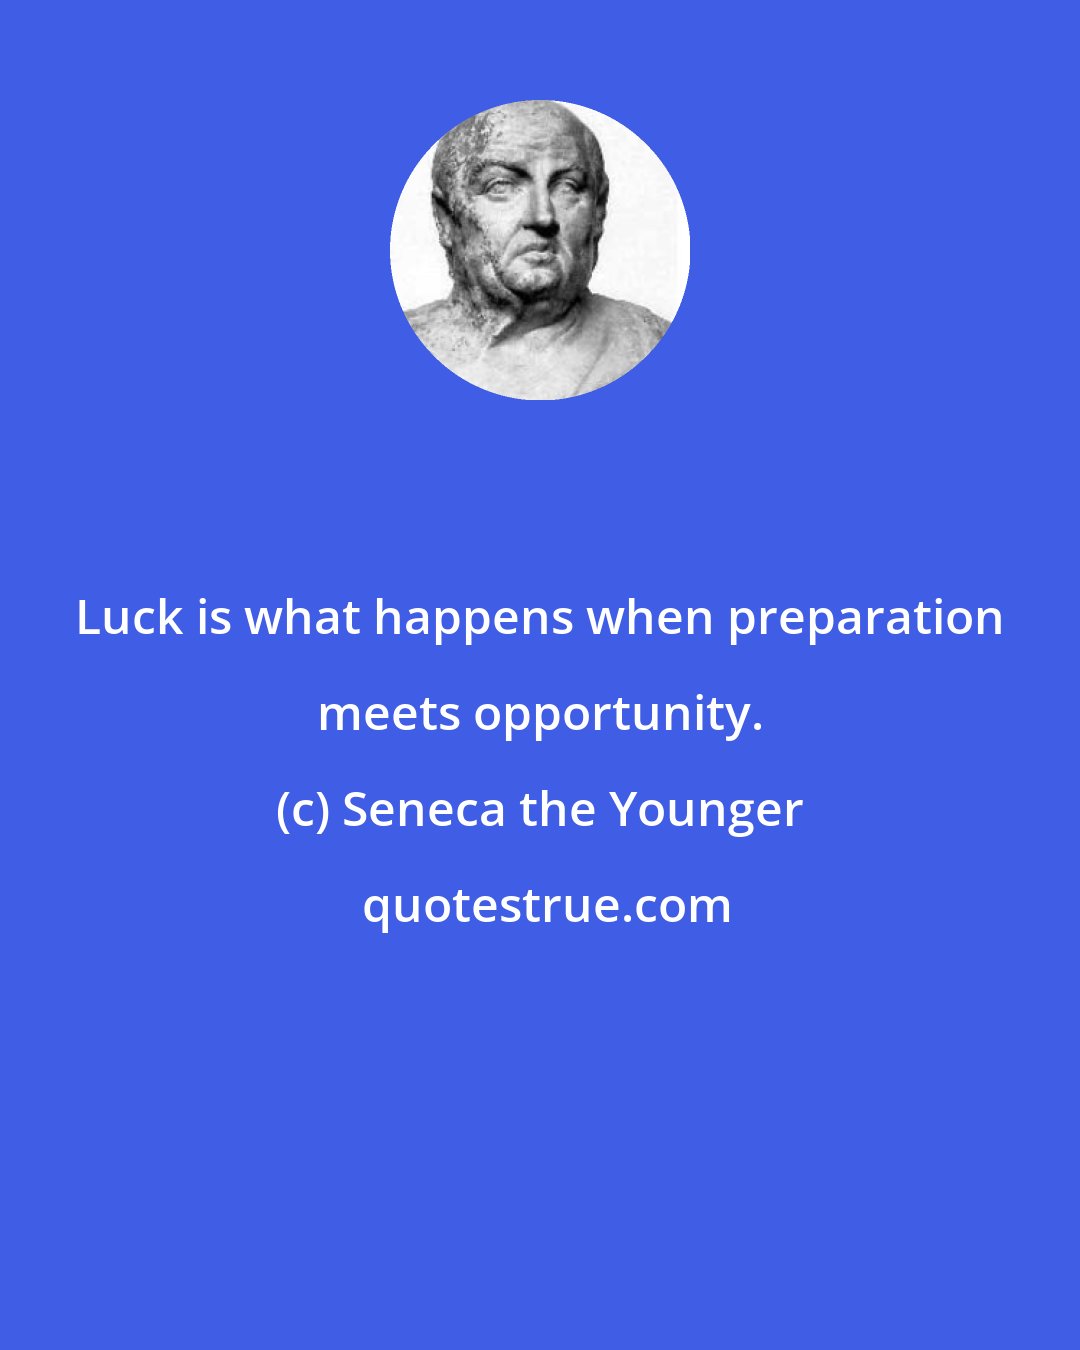 Seneca the Younger: Luck is what happens when preparation meets opportunity.